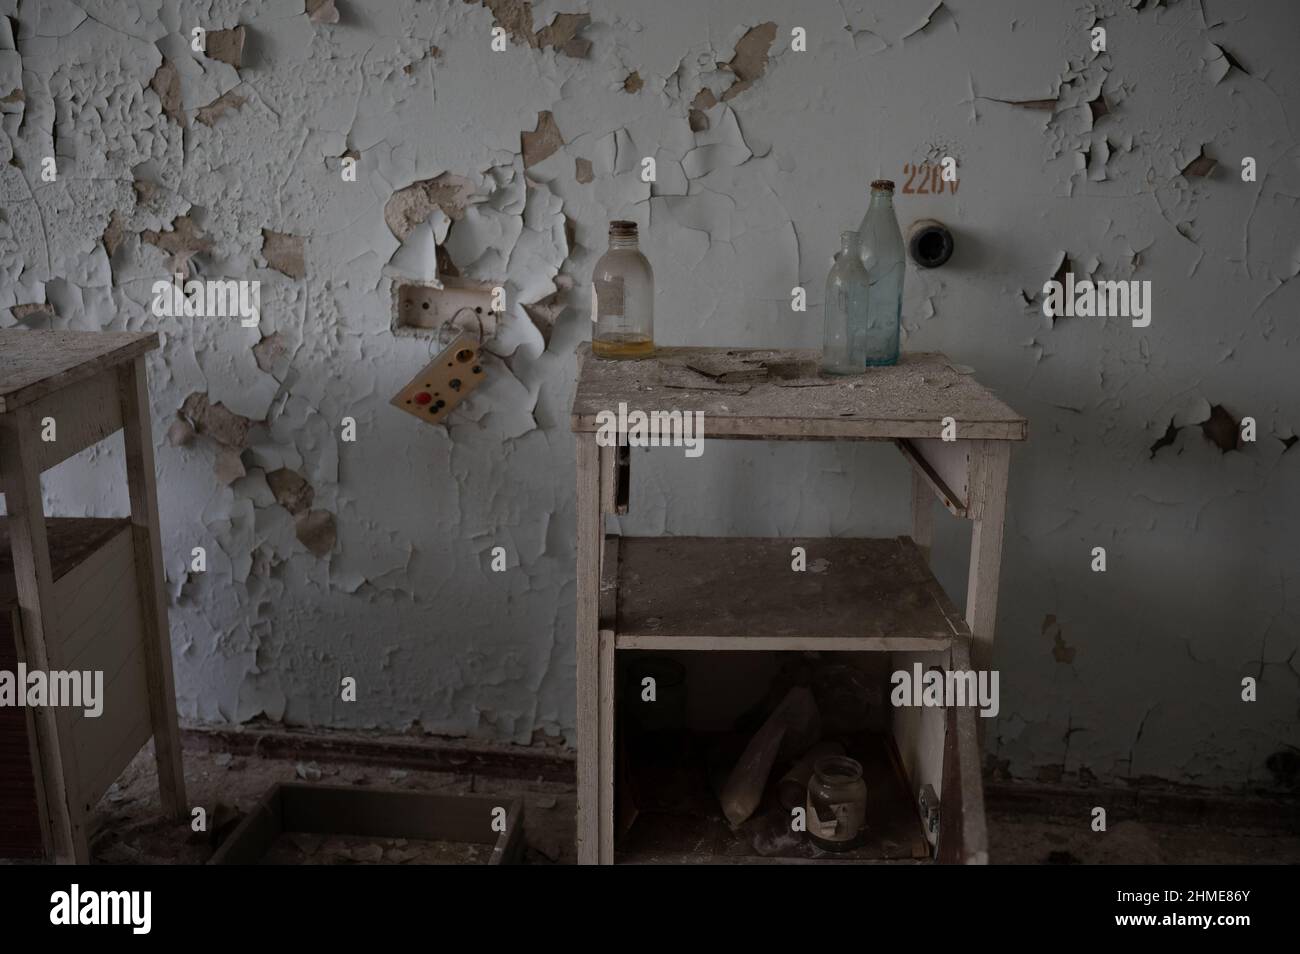 A large assortment of medicine, furniture and medical equipment remains decaying in the hospital in Pripyat, Ukraine near the Chernobyl Nuclear Plant. Stock Photo